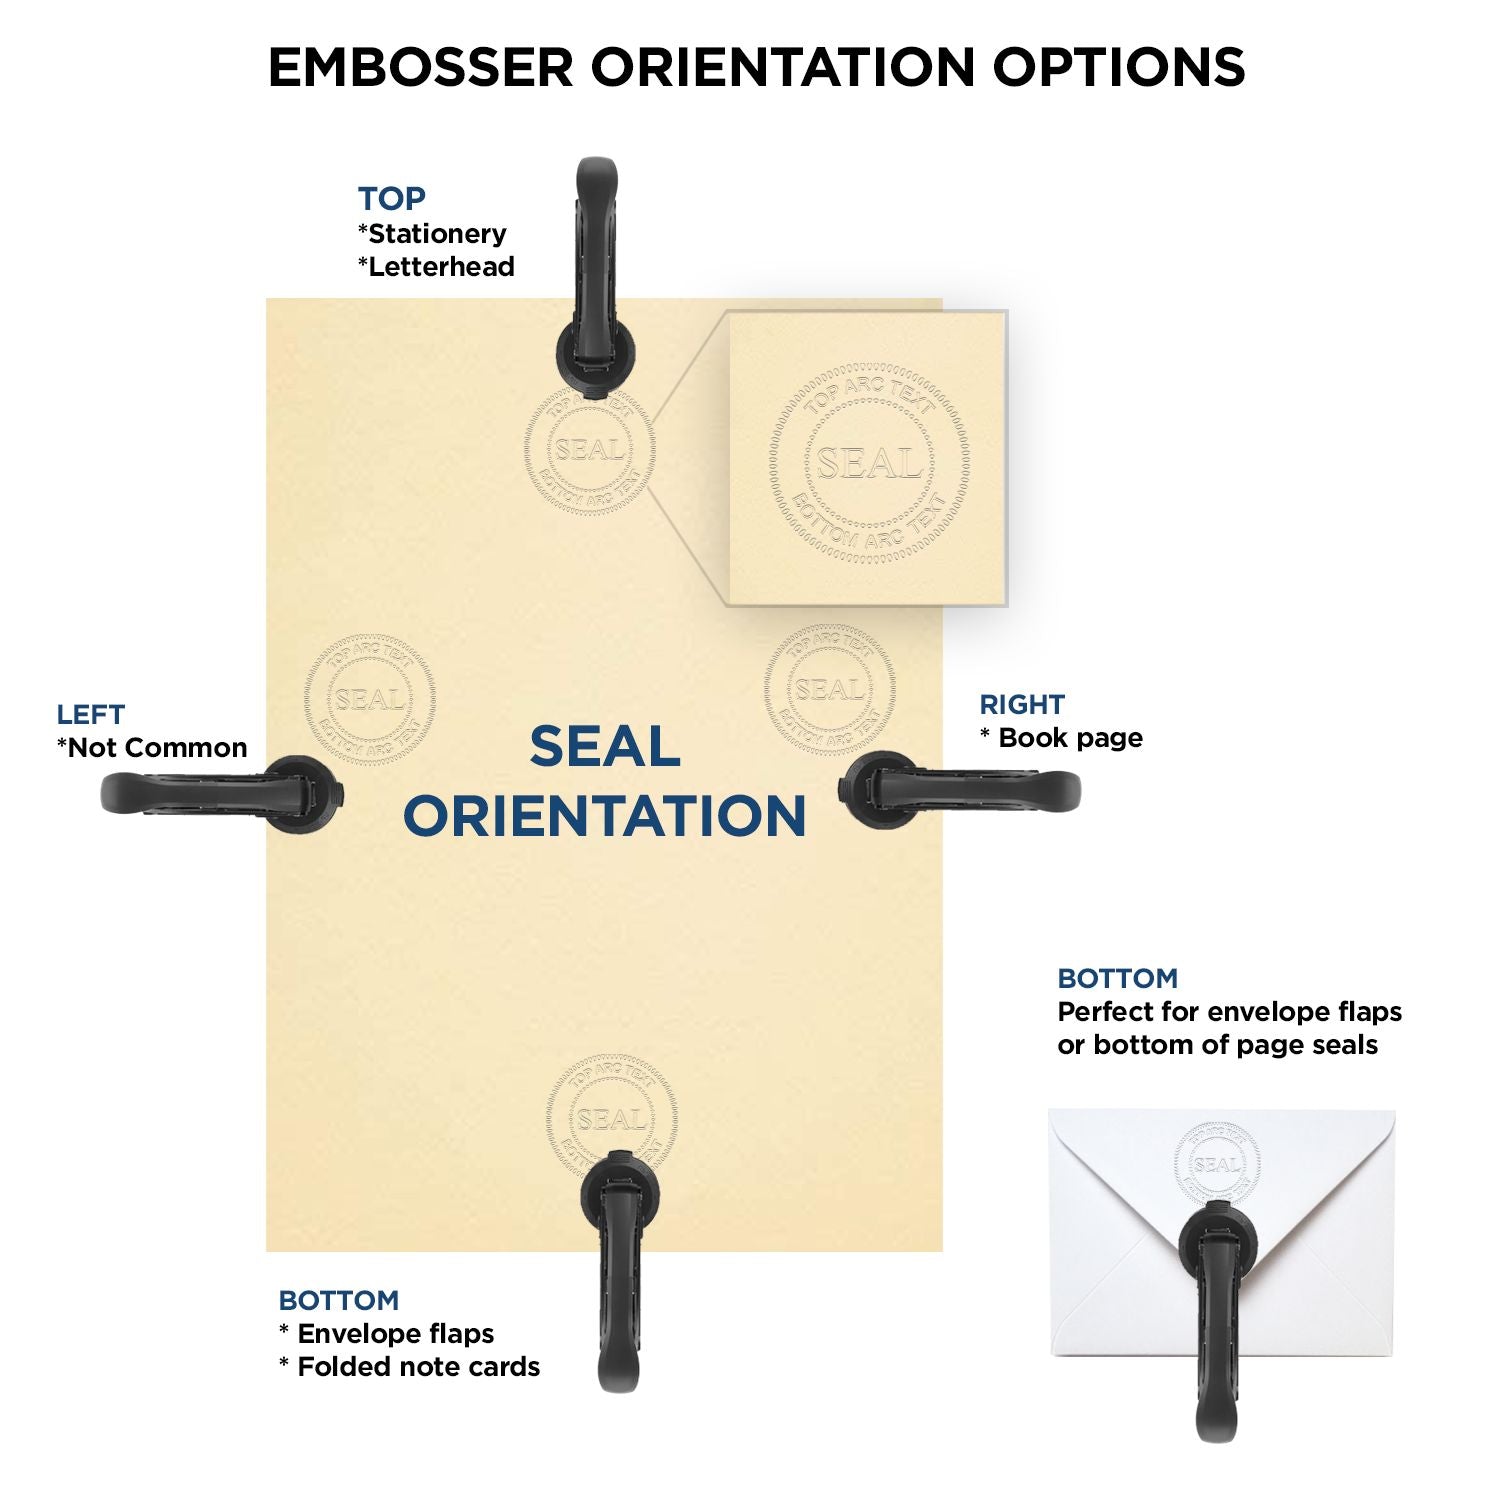 An infographic for the State of South Carolina Extended Long Reach Geologist Seal showing embosser orientation, this is showing examples of a top, bottom, right and left insert.